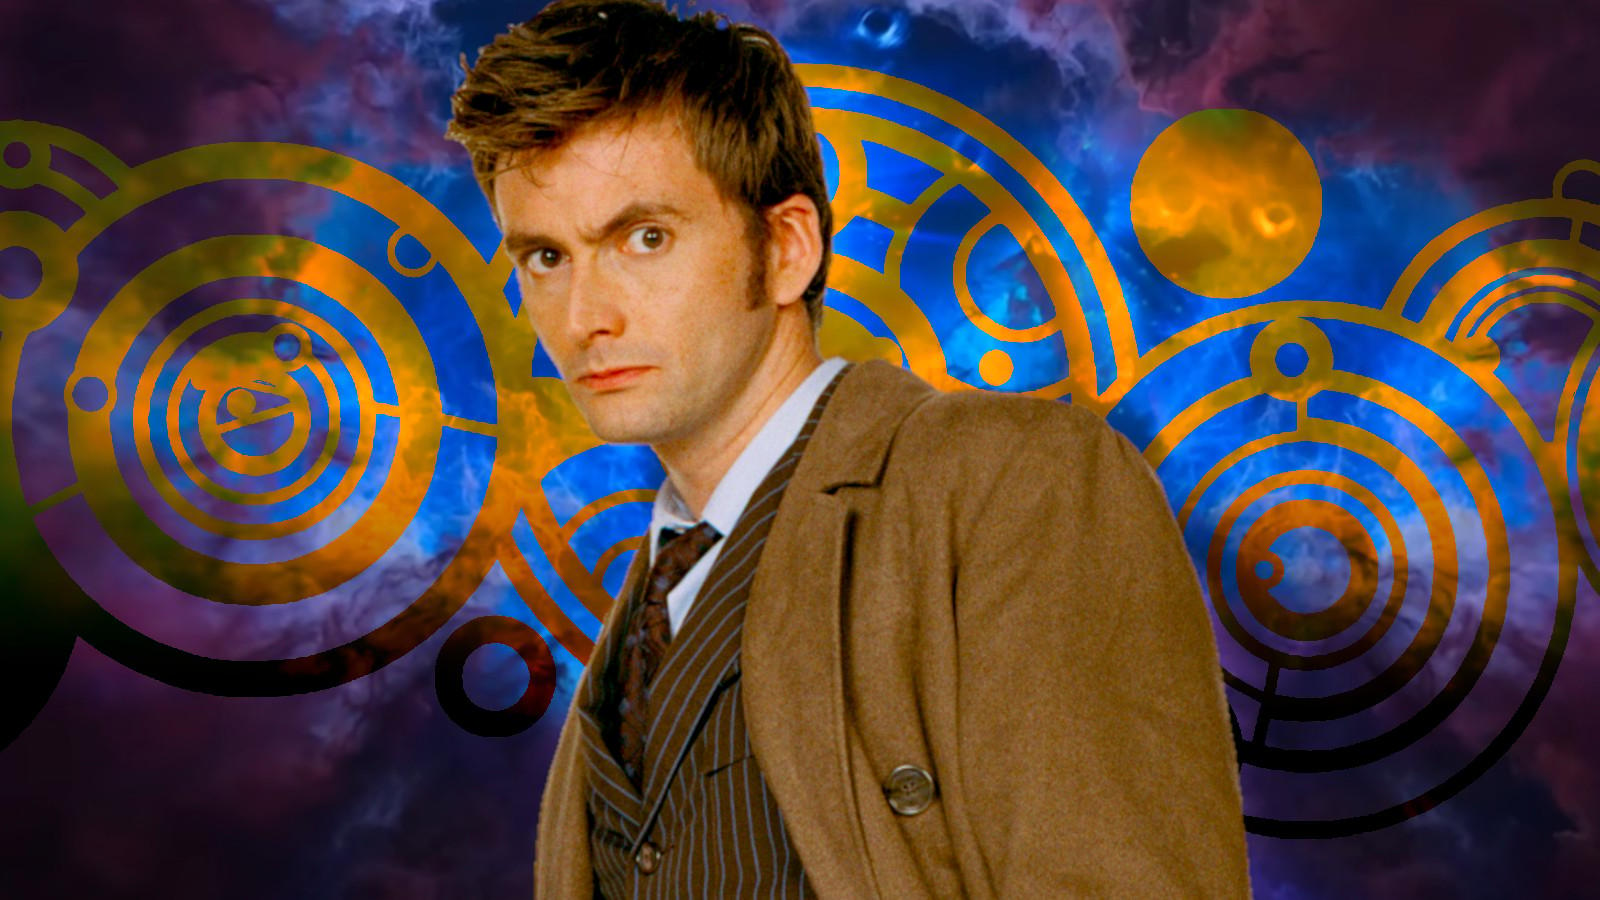 David Tennant as the Tenth Doctor in Doctor Who.